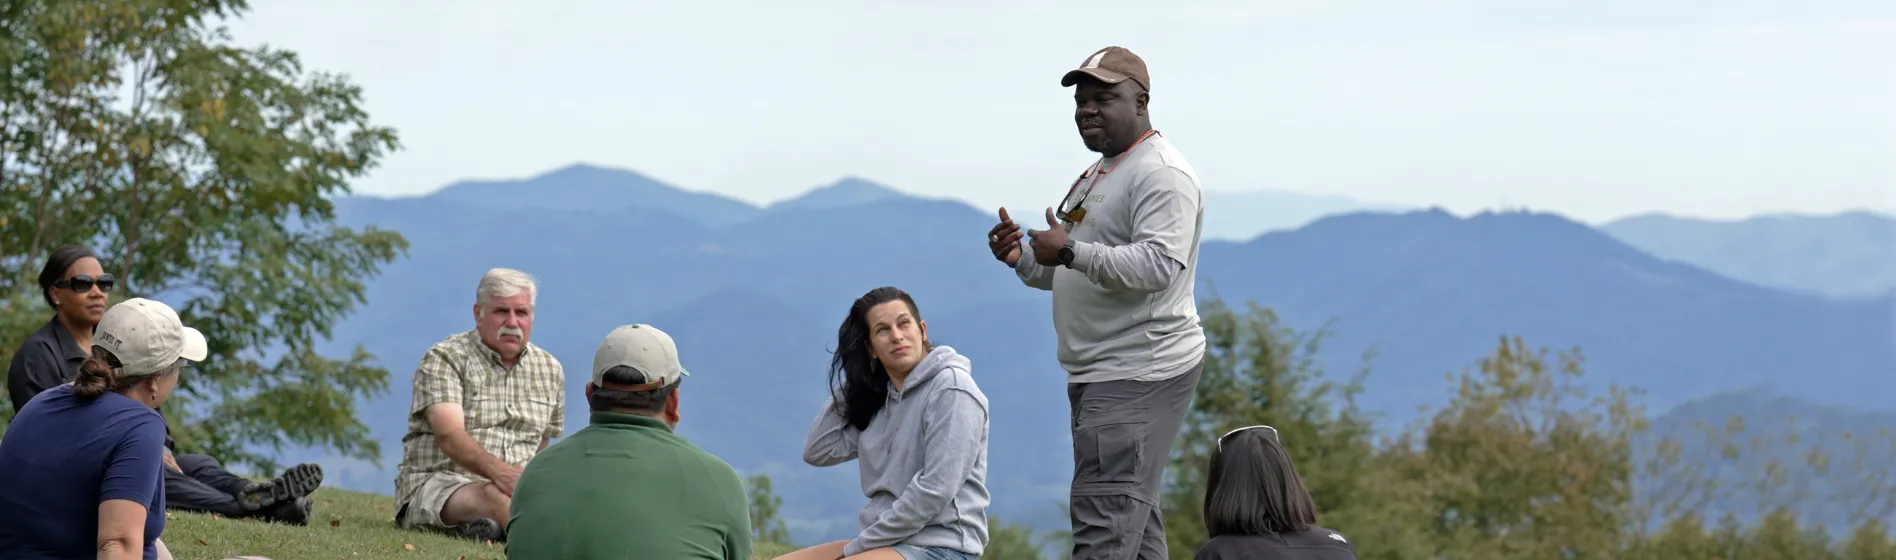 Man speaking to group in mountain outdoor setting